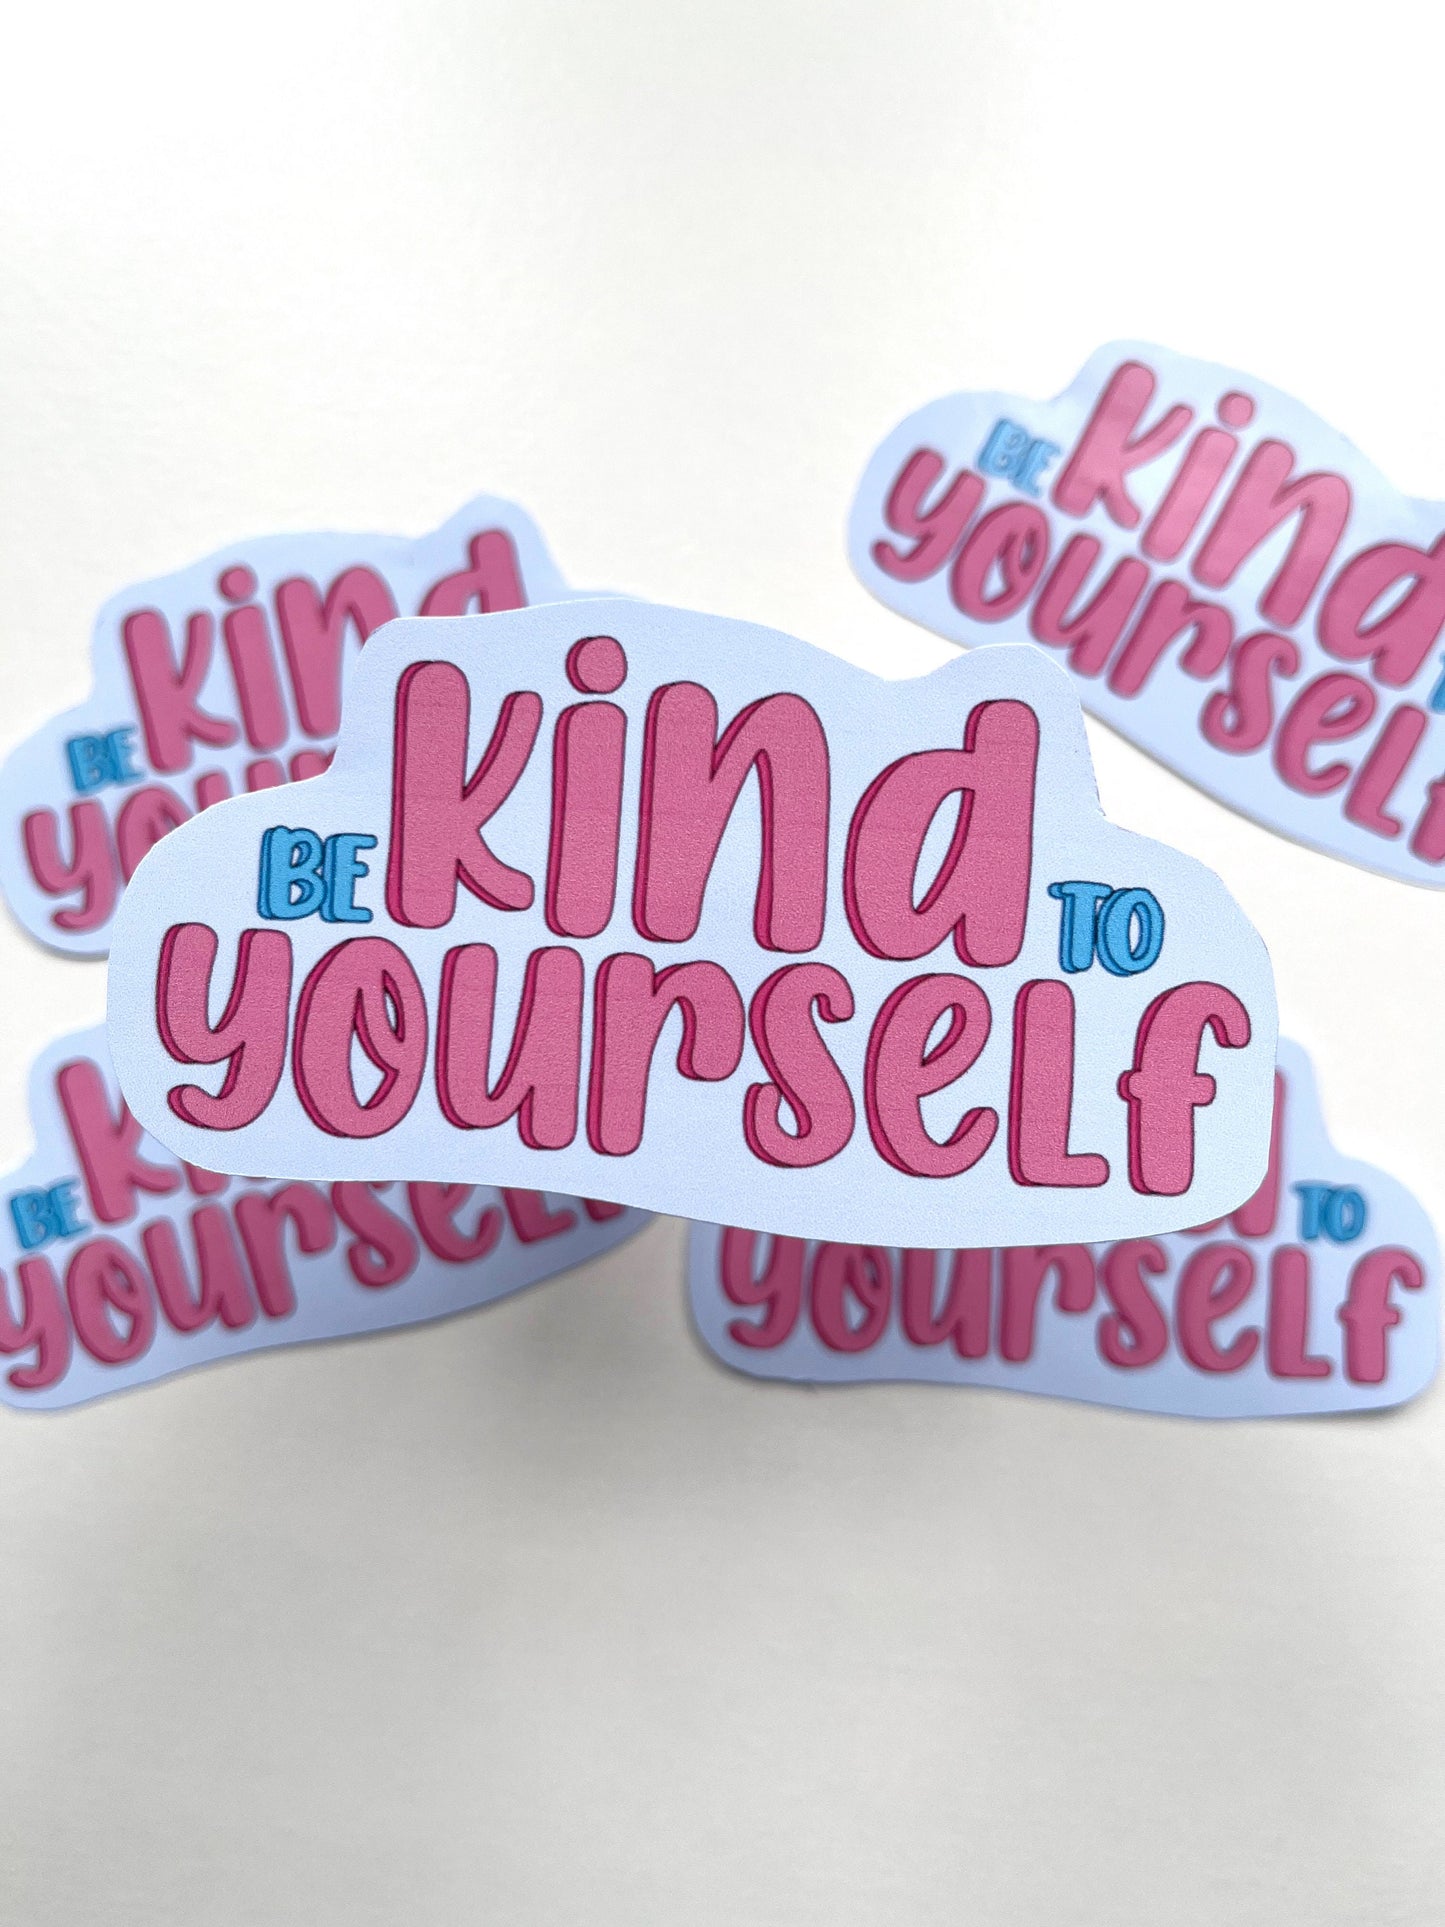 Be kind to yourself sticker